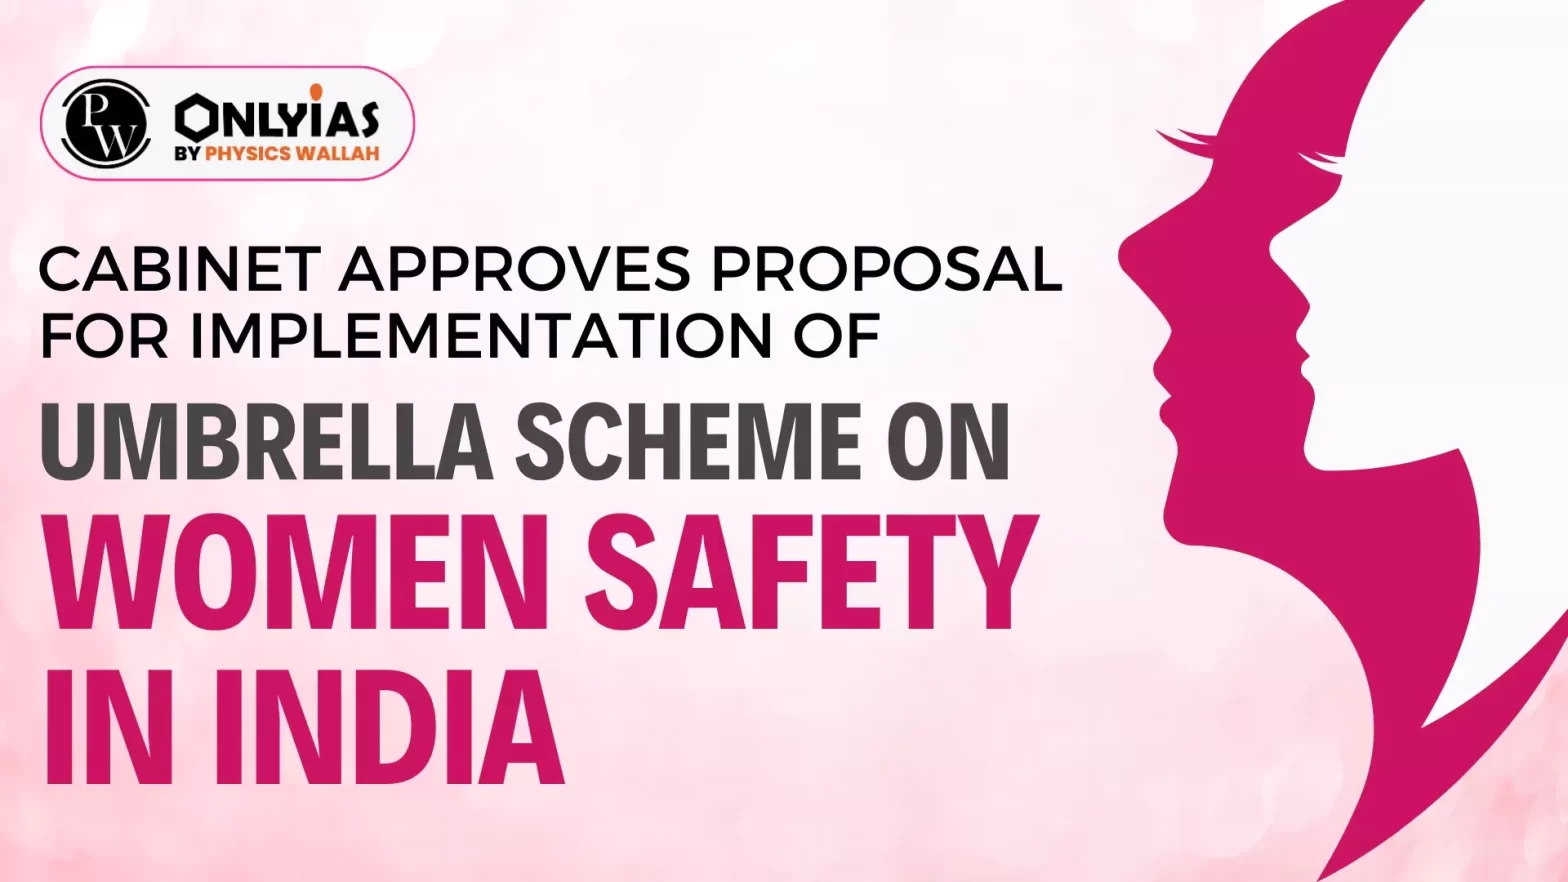 Cabinet Approves Proposal For Implementation of Umbrella Scheme on “Women Safety in India”